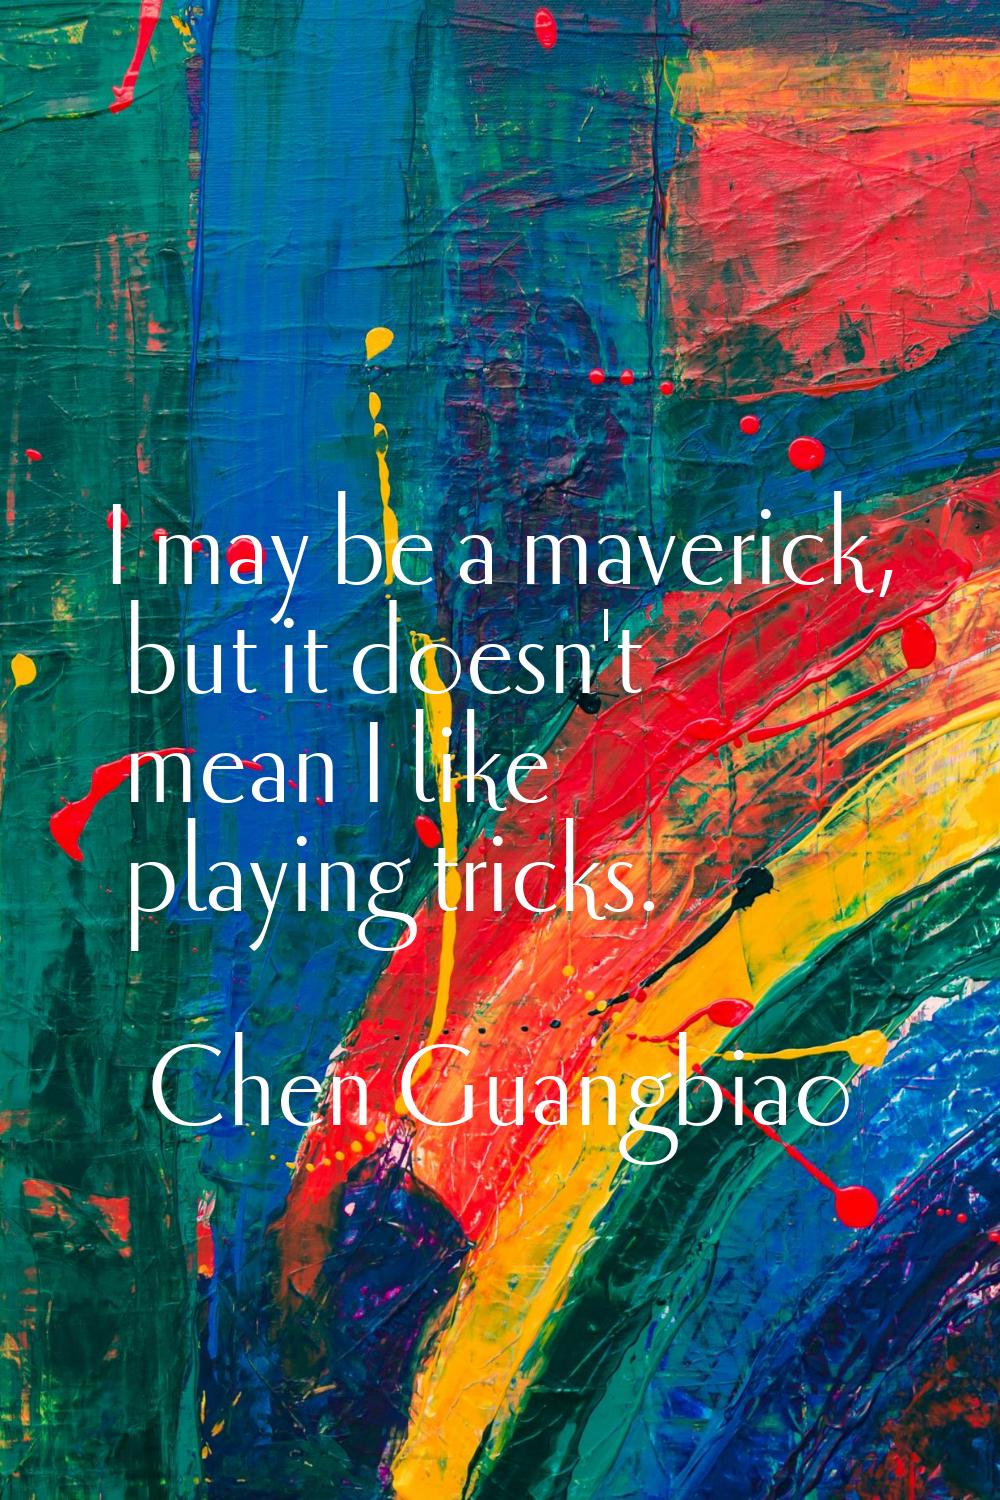 I may be a maverick, but it doesn't mean I like playing tricks.